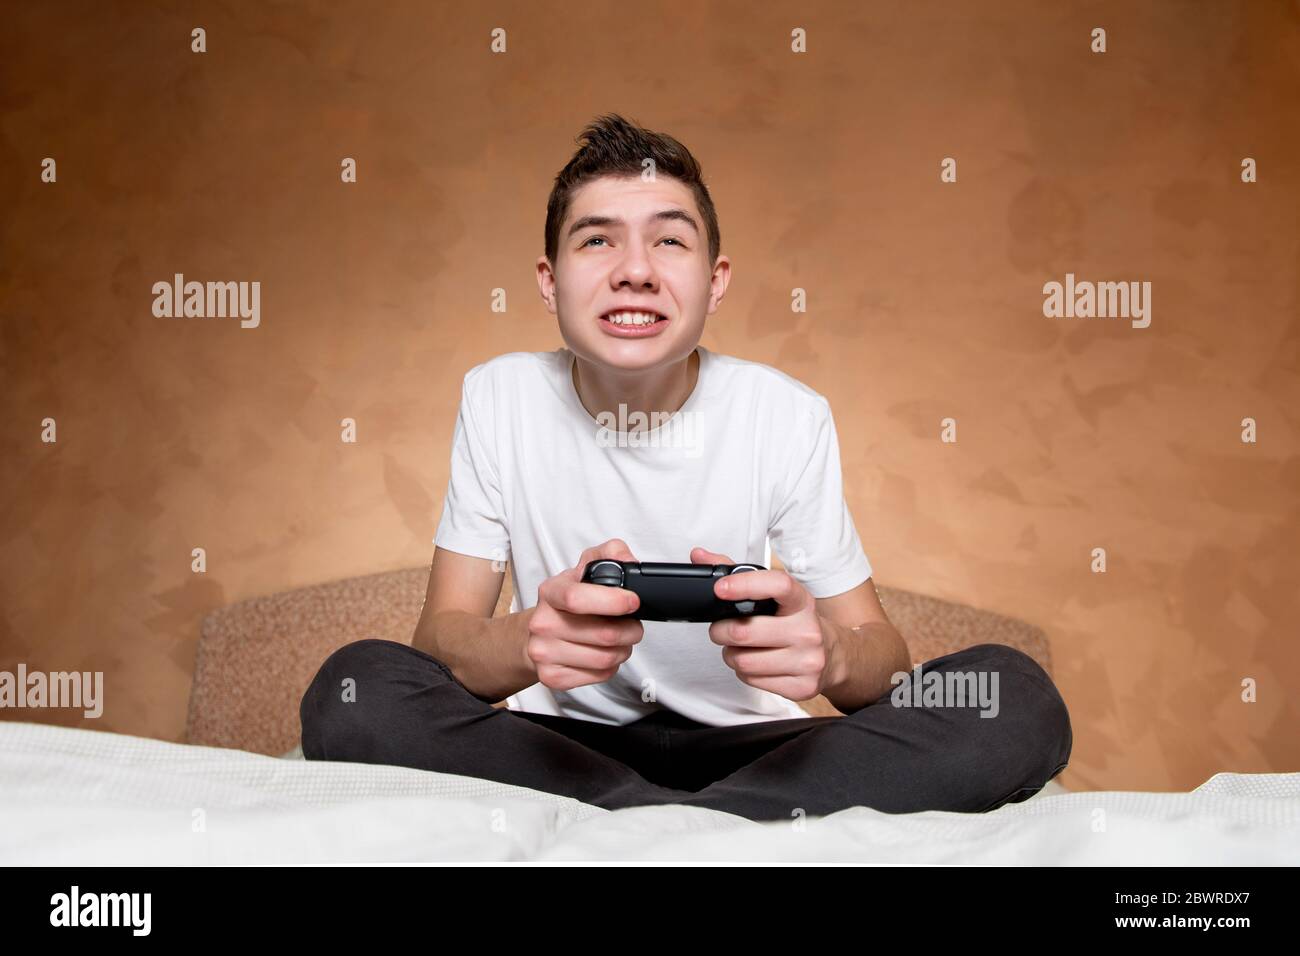 A boy in a white T-shirt enthusiastically plays a video game using a modified joystick without identification marks Stock Photo